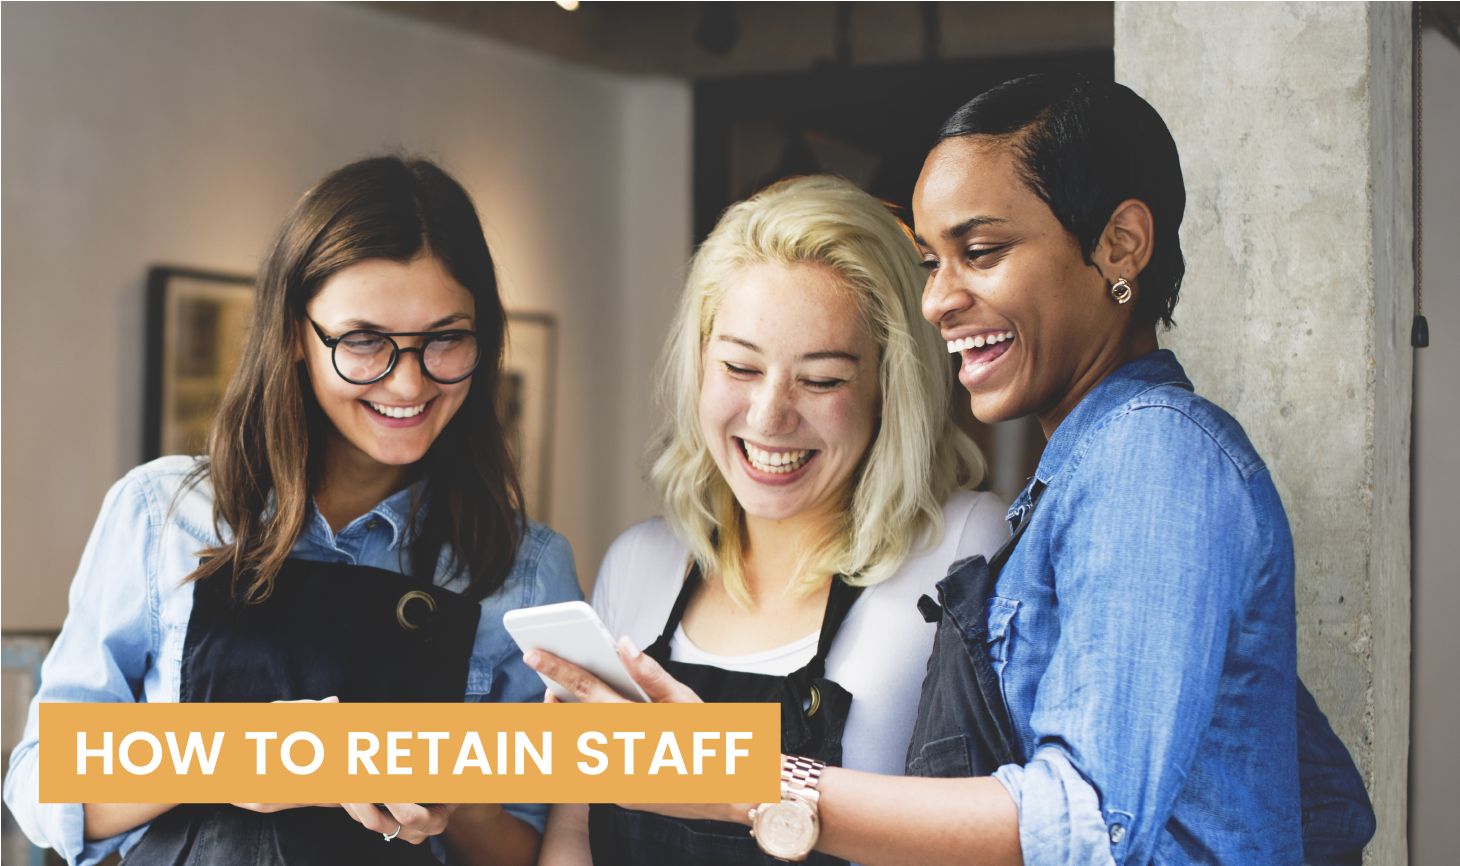 How to retain staff